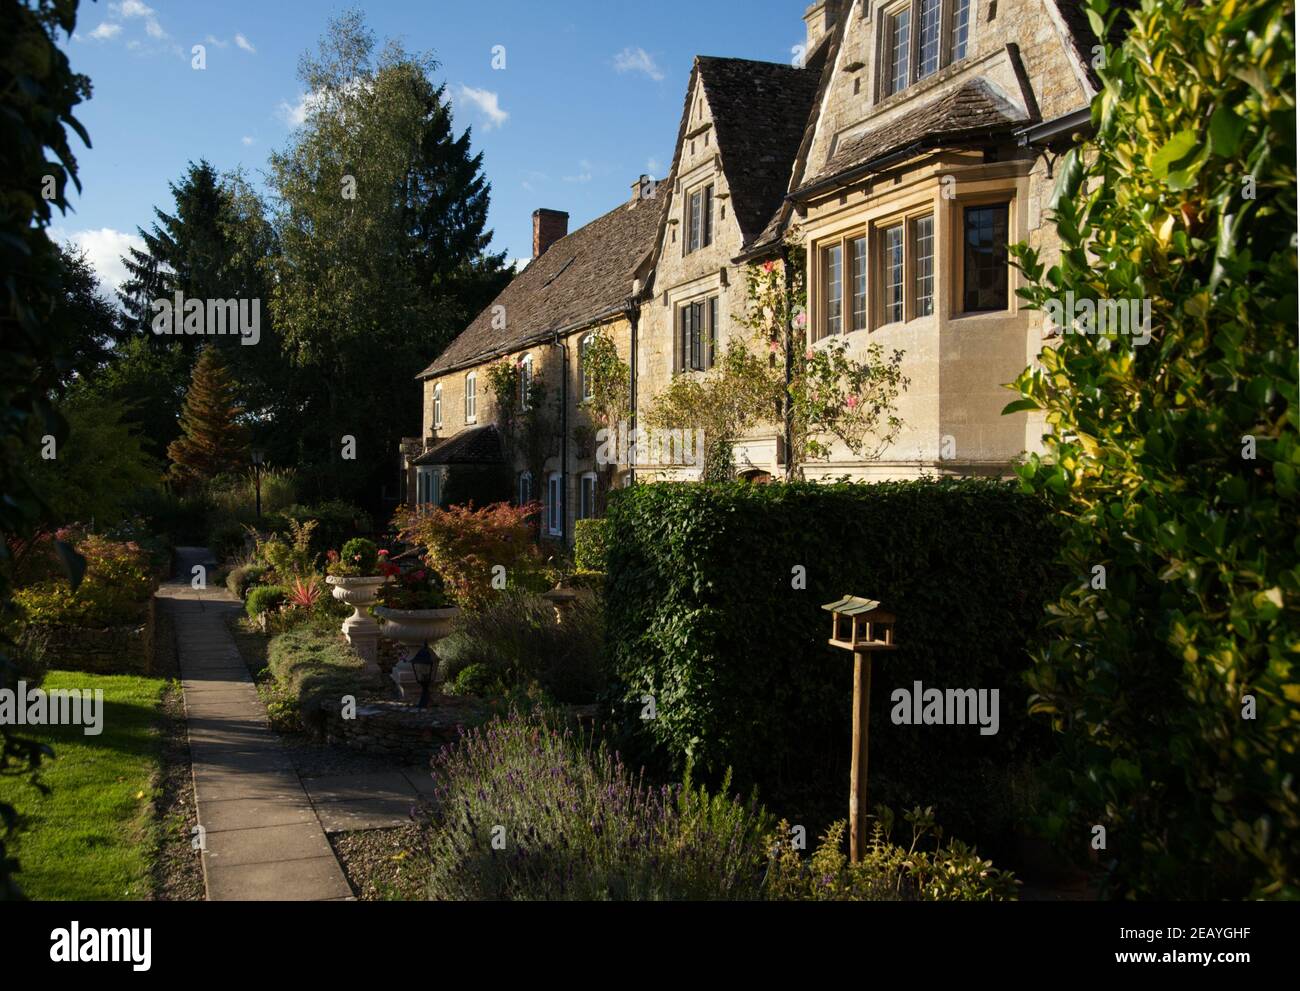 House and Garden, Bourton-on-the-Water, Cotswolds, Royaume-Uni Banque D'Images